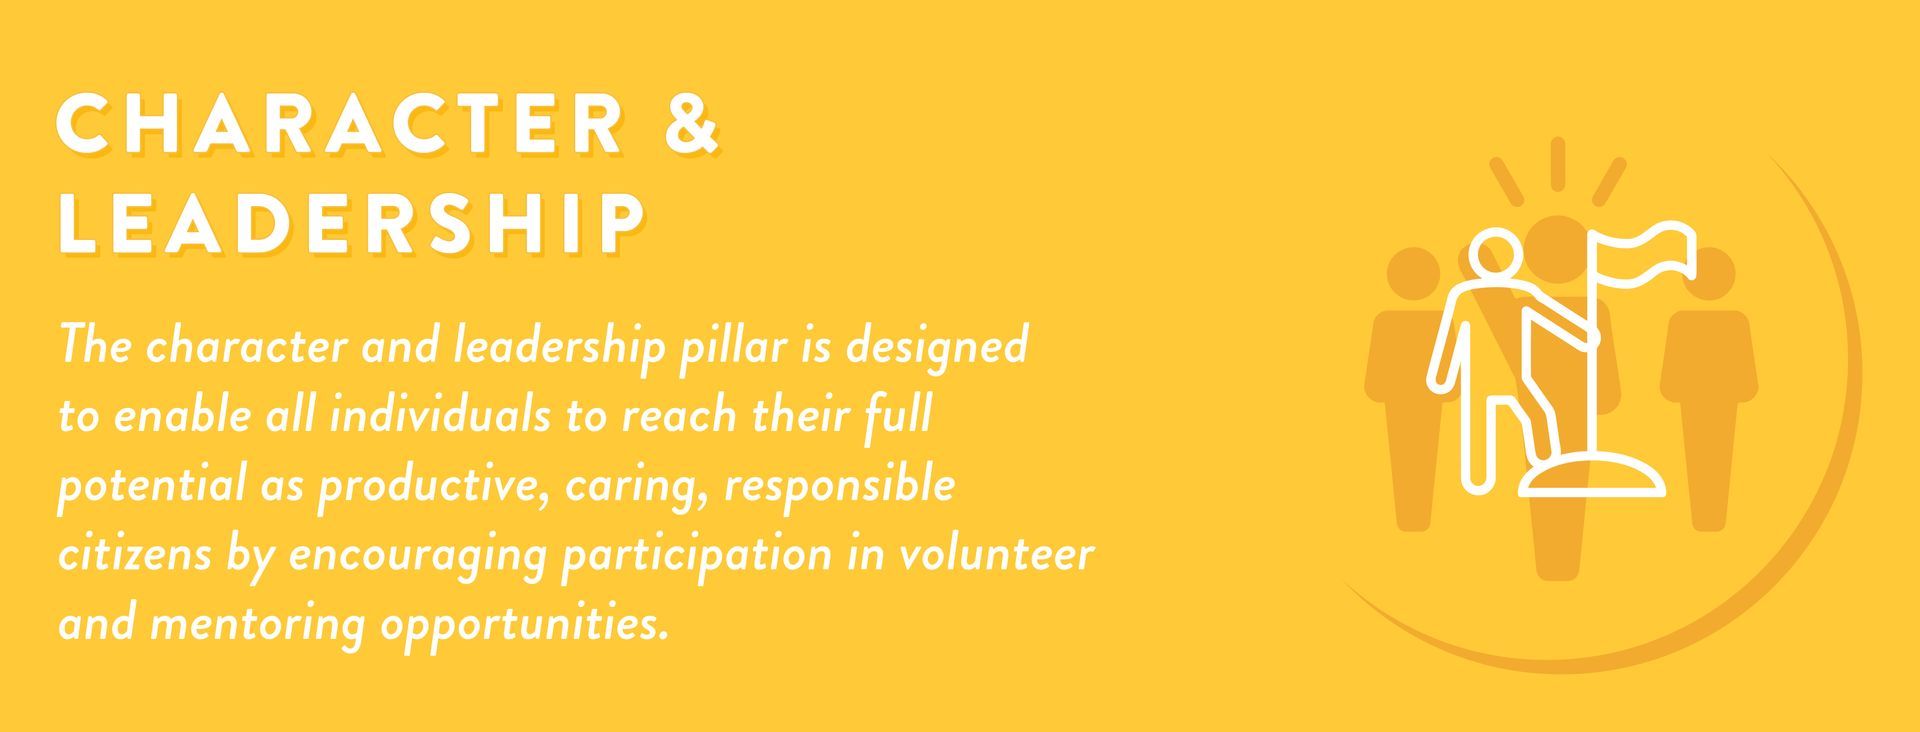 The character and leadership pillar is designed to enable all individuals to reach their full potential as productive, caring, responsible citizens by encouraging participation in volunteer and mentoring opportunities.